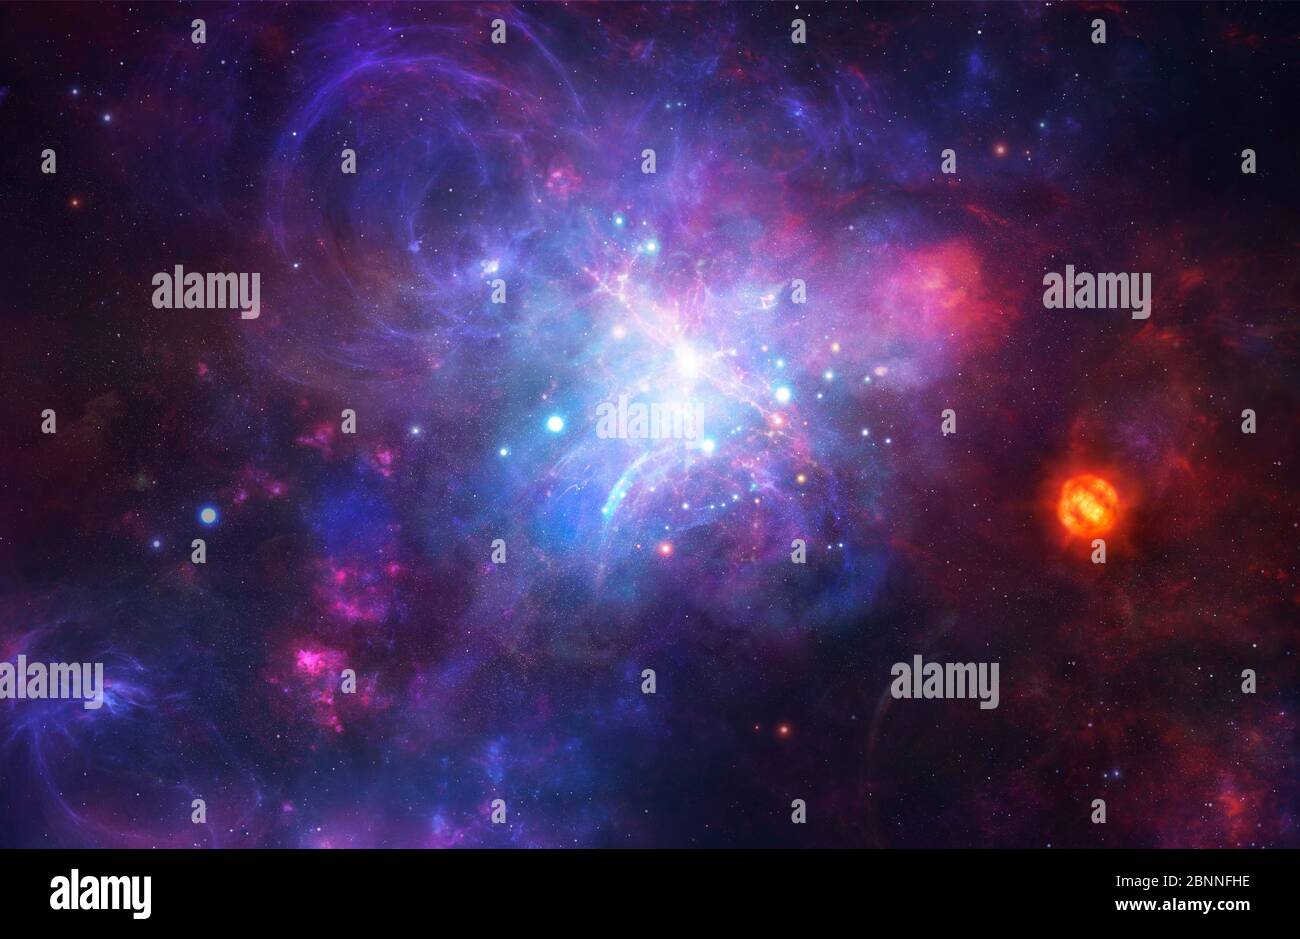 Illustration of a protogalaxy, or a primeval galaxy. These were very early, giant clouds of gas which were forming into the first galaxies. It is believed that the rate of star formation during this period of galactic evolution will determine whether a galaxy is a spiral or elliptical galaxy; a slower star formation tends to produce a spiral galaxy. The smaller clumps of gas in a protogalaxy form into stars. Stock Photo